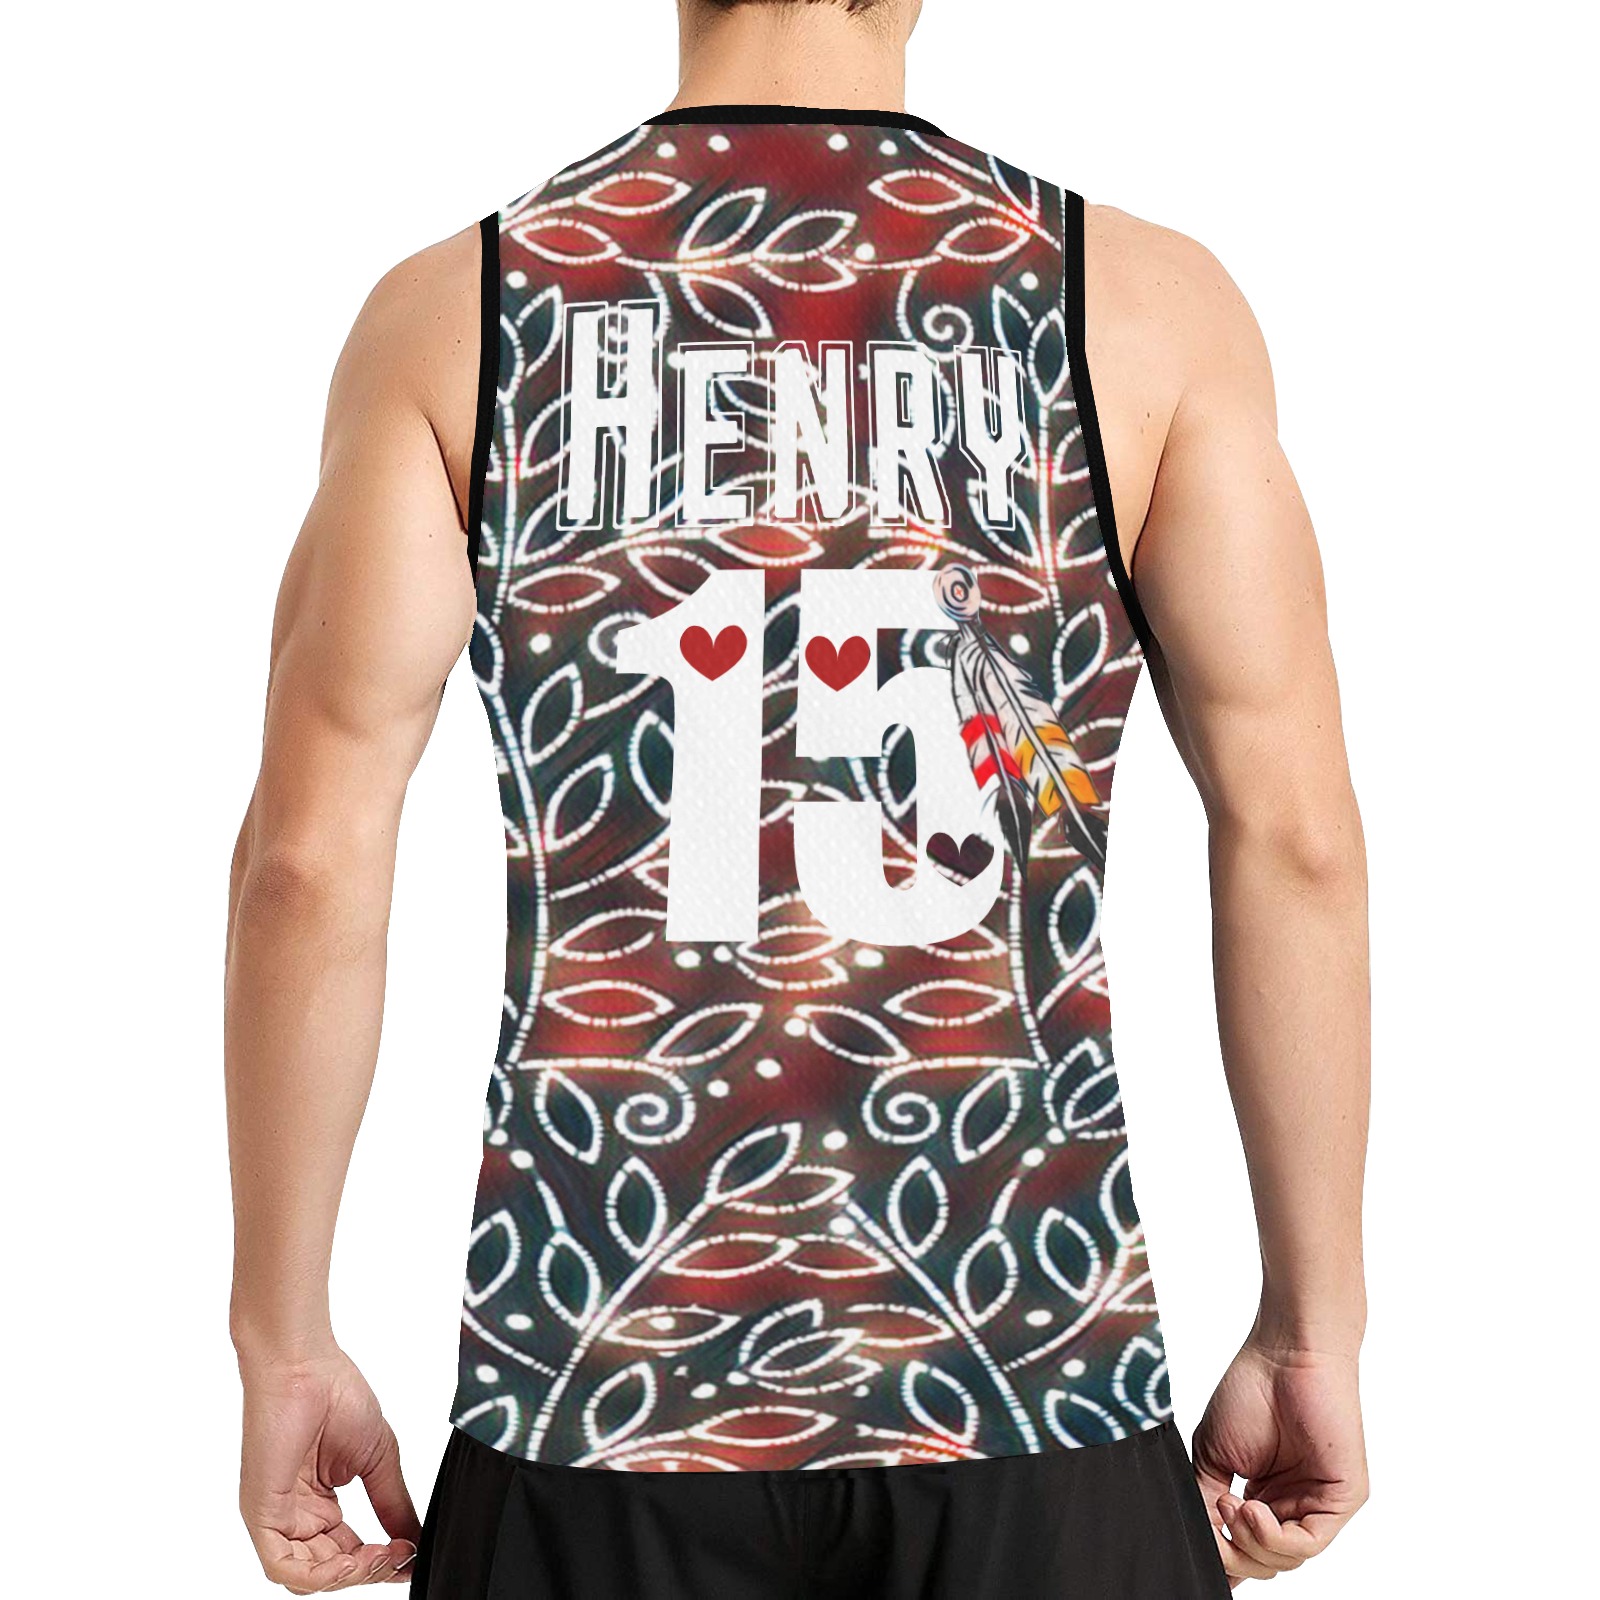 MMIW jersey henry15 All Over Print Basketball Jersey